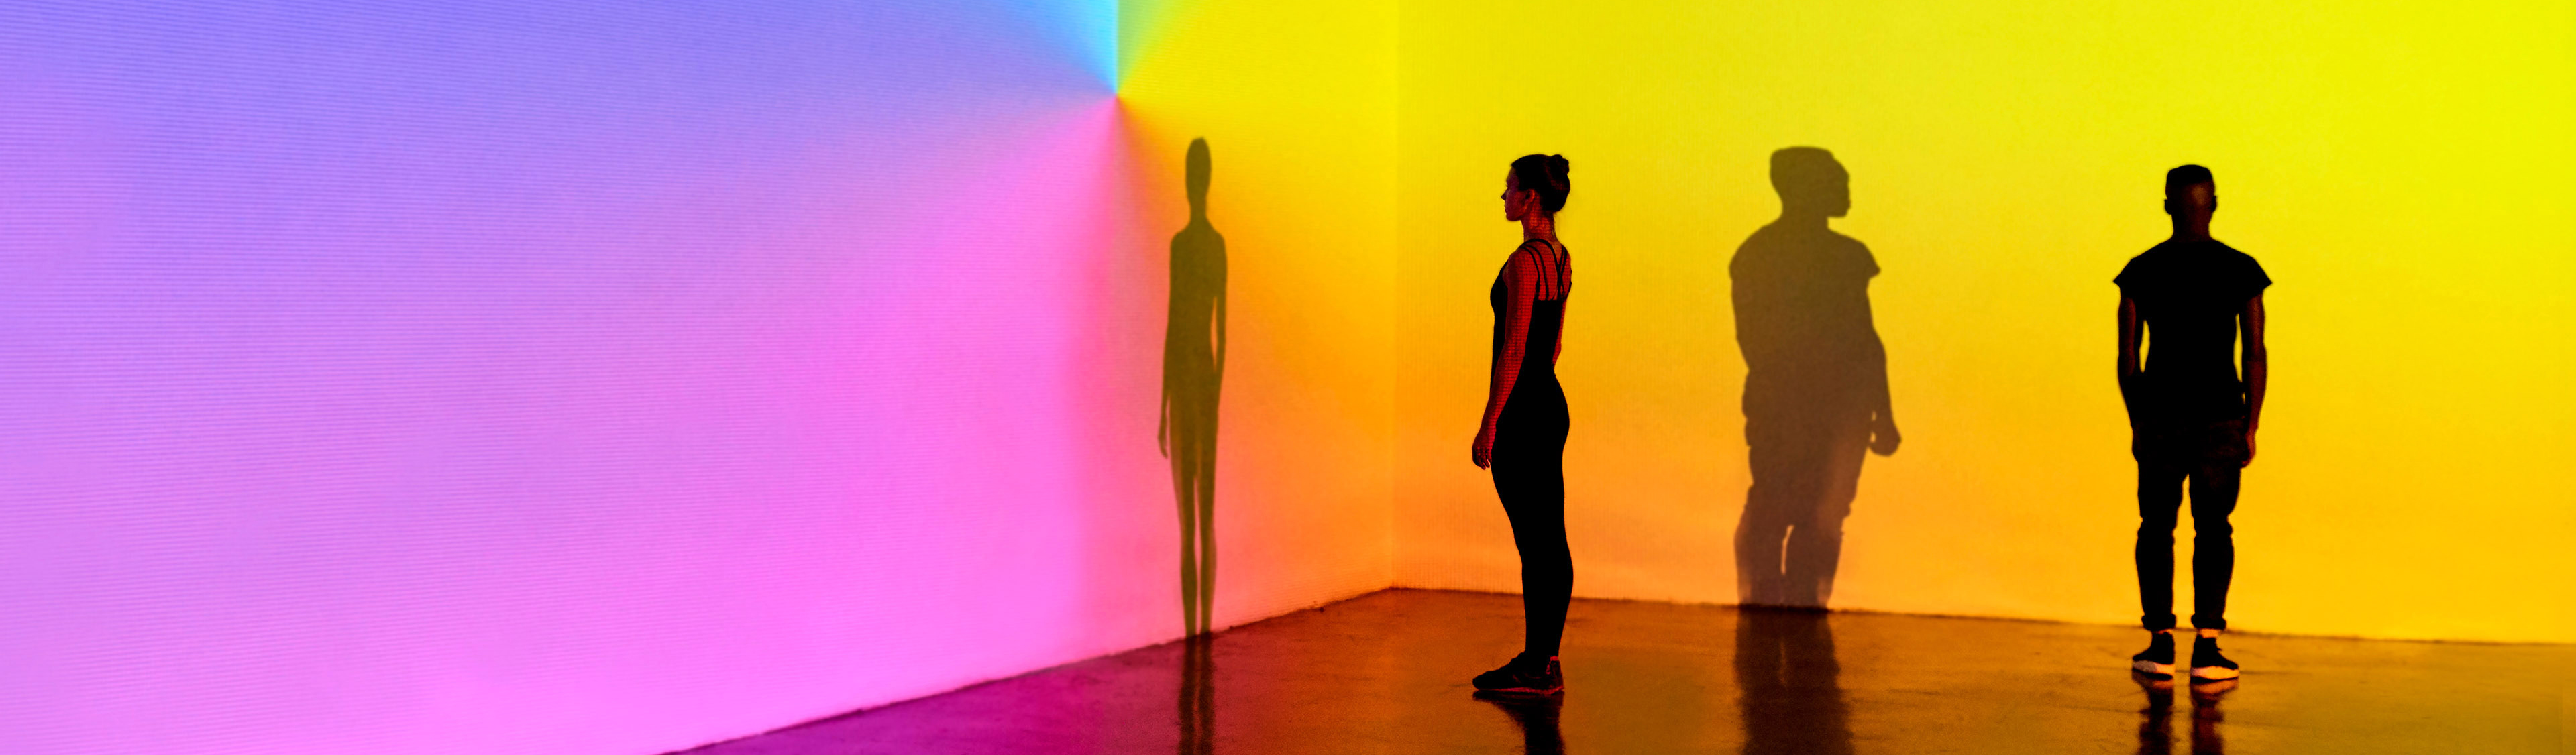 Man and woman standing in a gallery space with colourful walls background